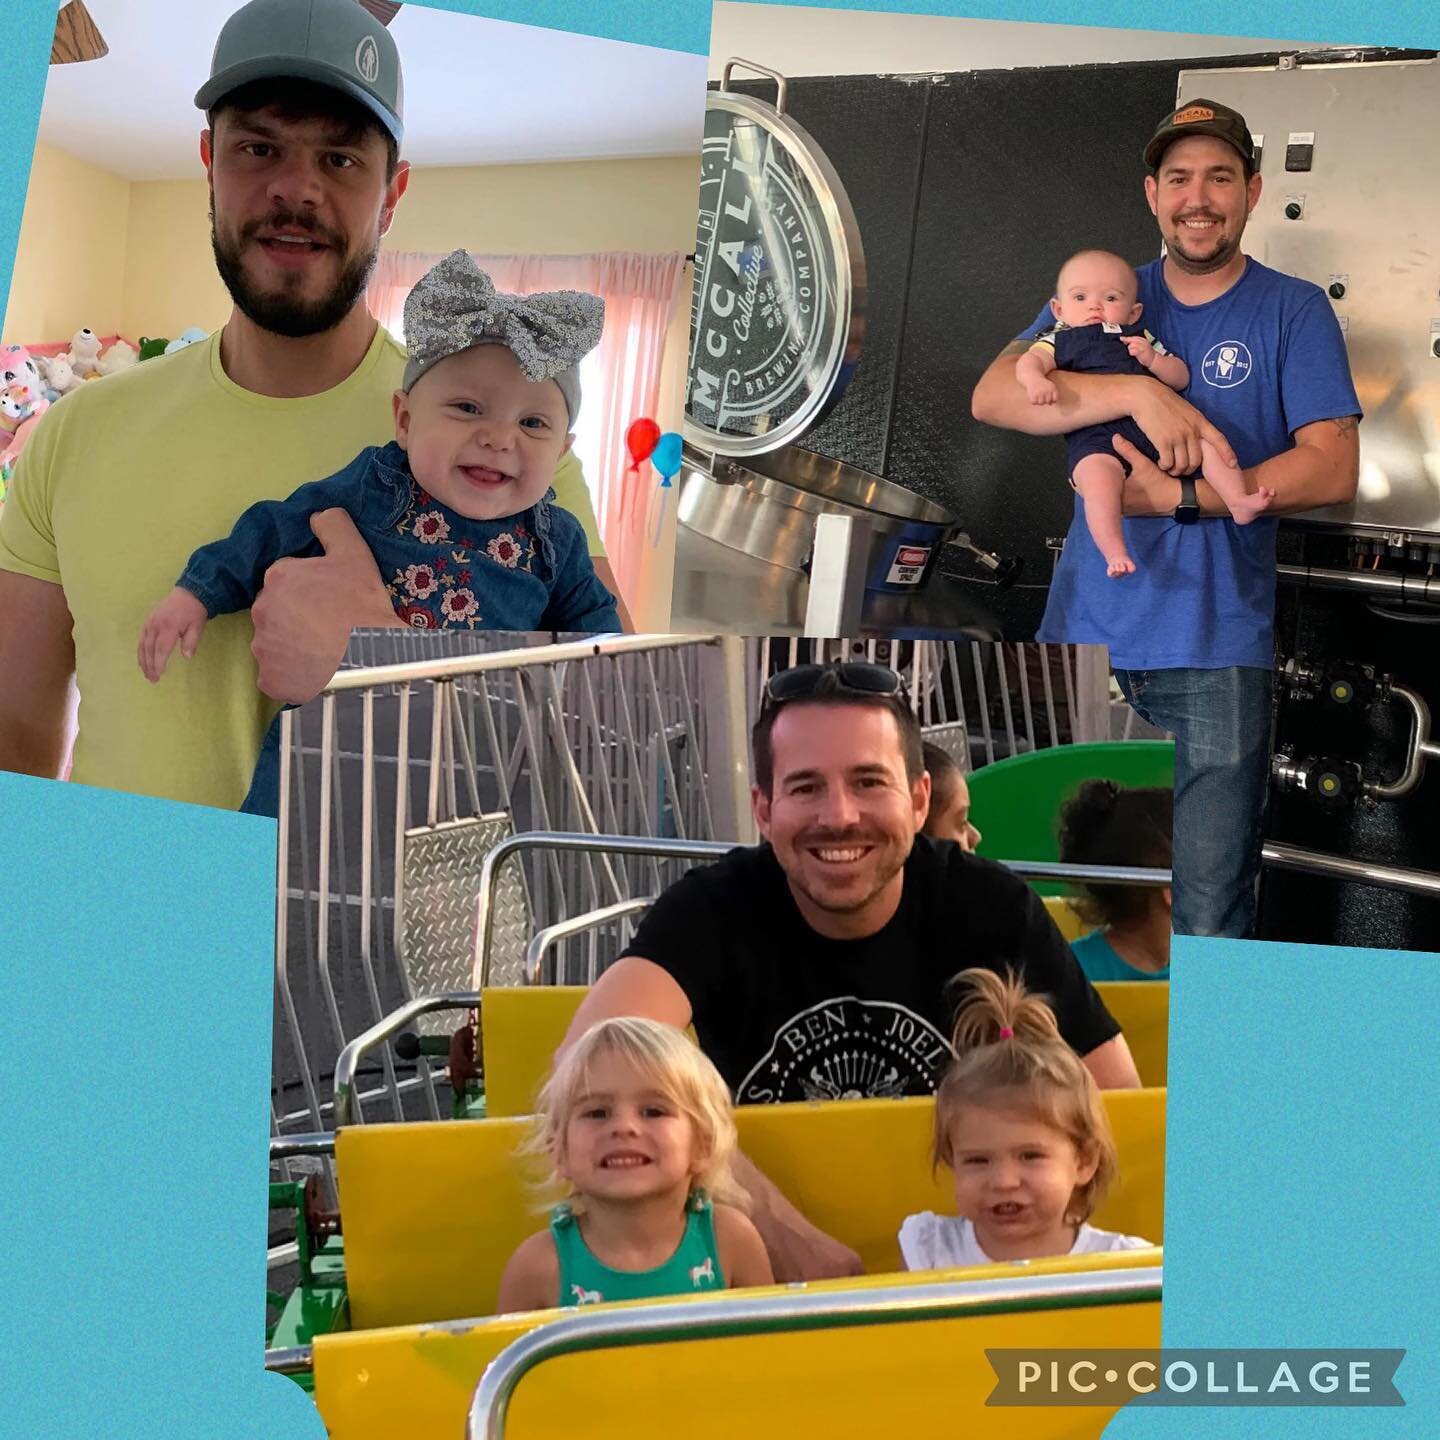 Happy Father&rsquo;s Day to all the different kinds of Dads out there! And a special Father&rsquo;s Day wish to our own @eman66289 @tallmccall22 @chrismac0314 and the rest of the Dad&rsquo;s on our team!! We hope you all enjoy your day 🍻You all dese